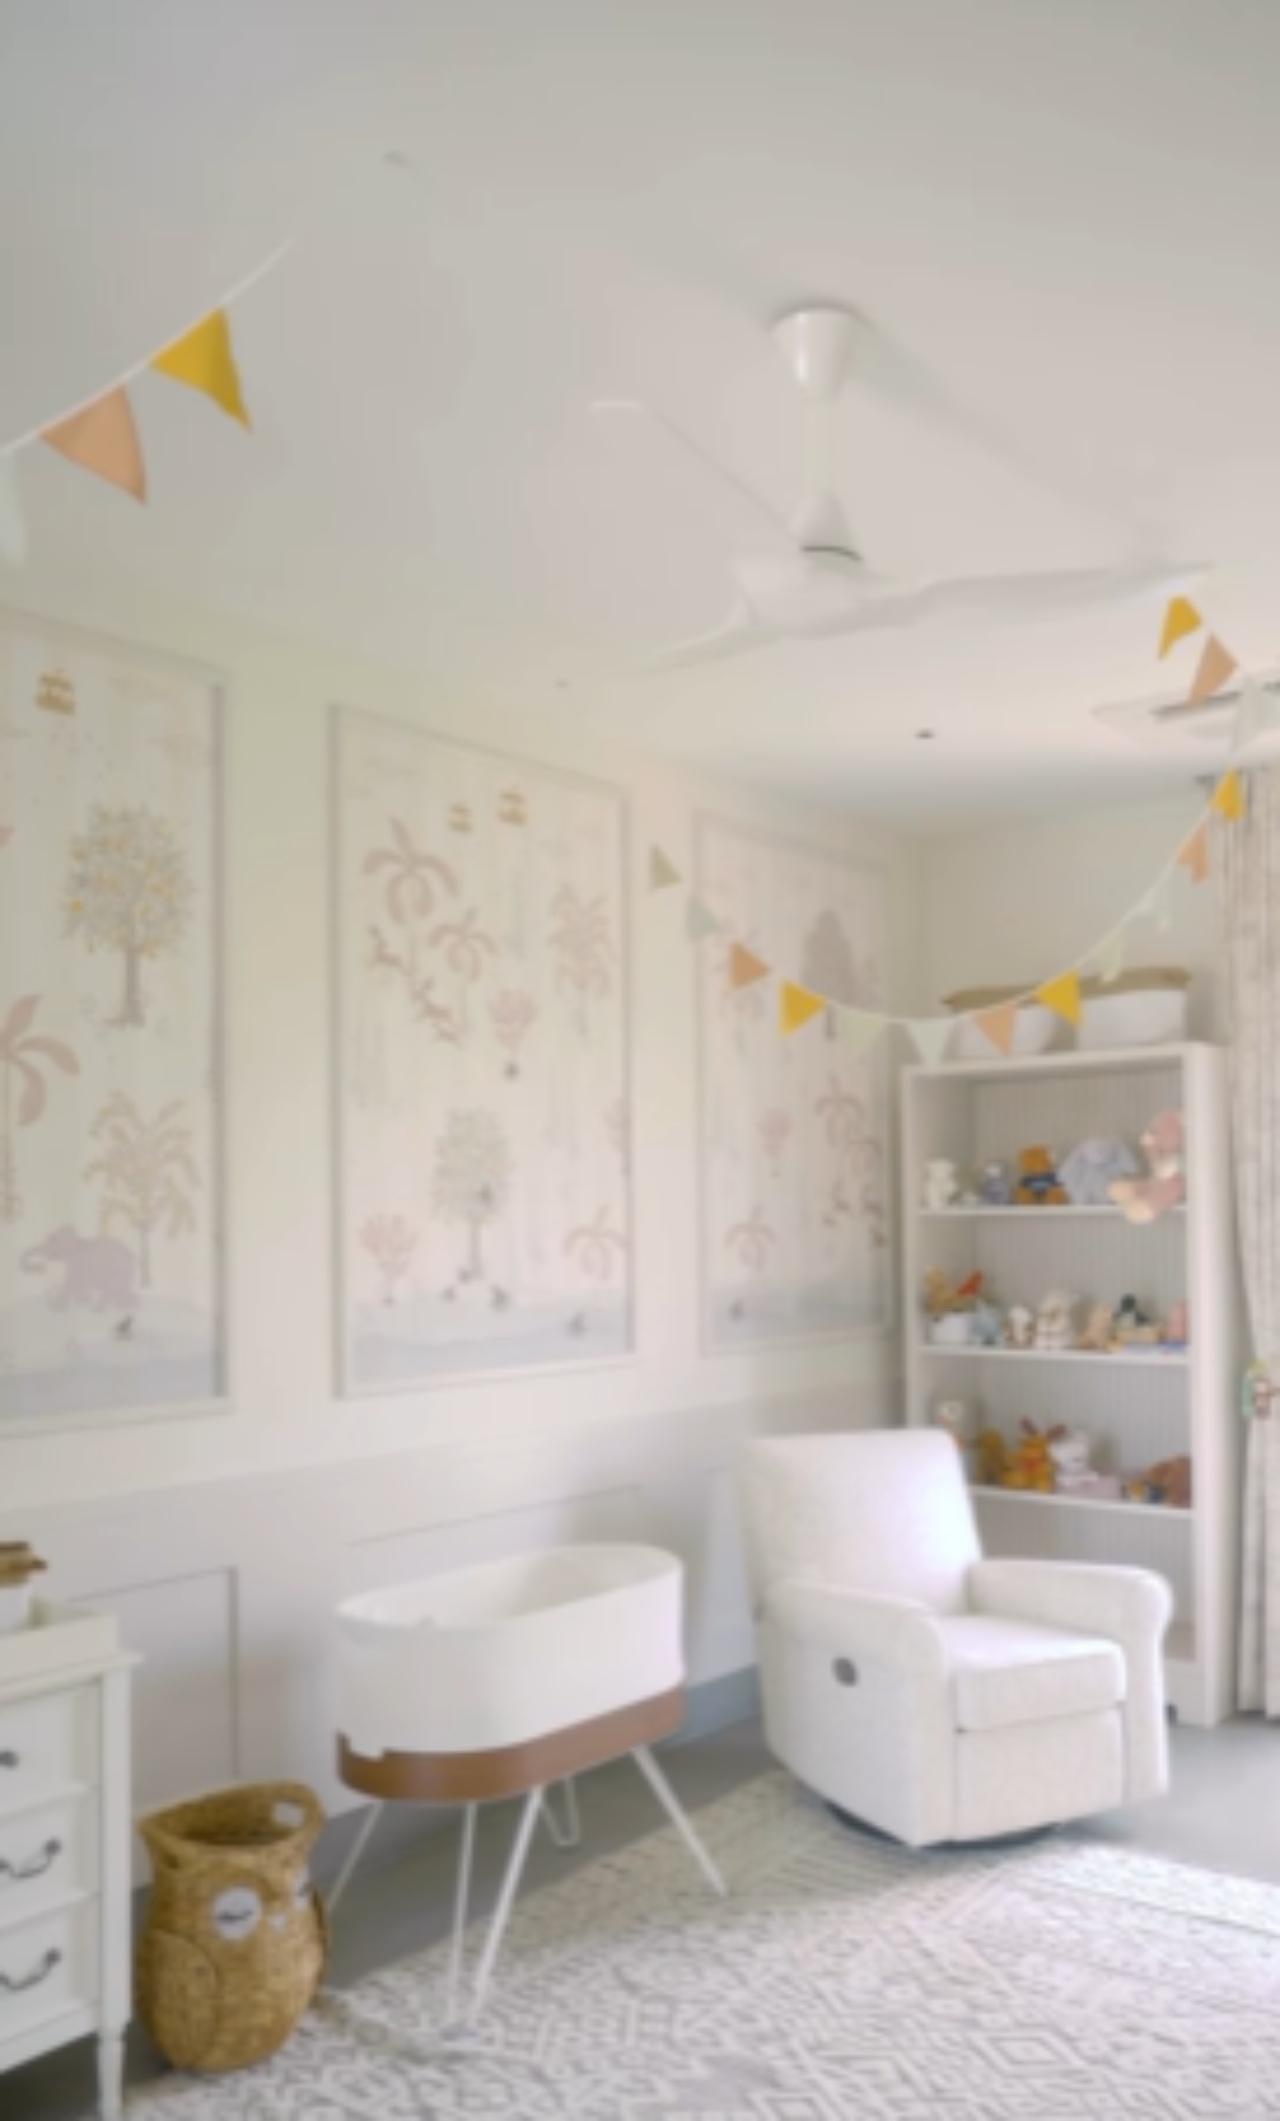 The couple also shared glimpses of the nursery they had envisioned for their baby. Ram Charan and Upasana are nature lovers and have a special reverence for the forest - as could also be seen through Klin Kara's naming ceremony decor. The video showed the making of the baby's forest-themed nursery, which had been designed with a minimalist theme and soothing, muted colour palette in mind